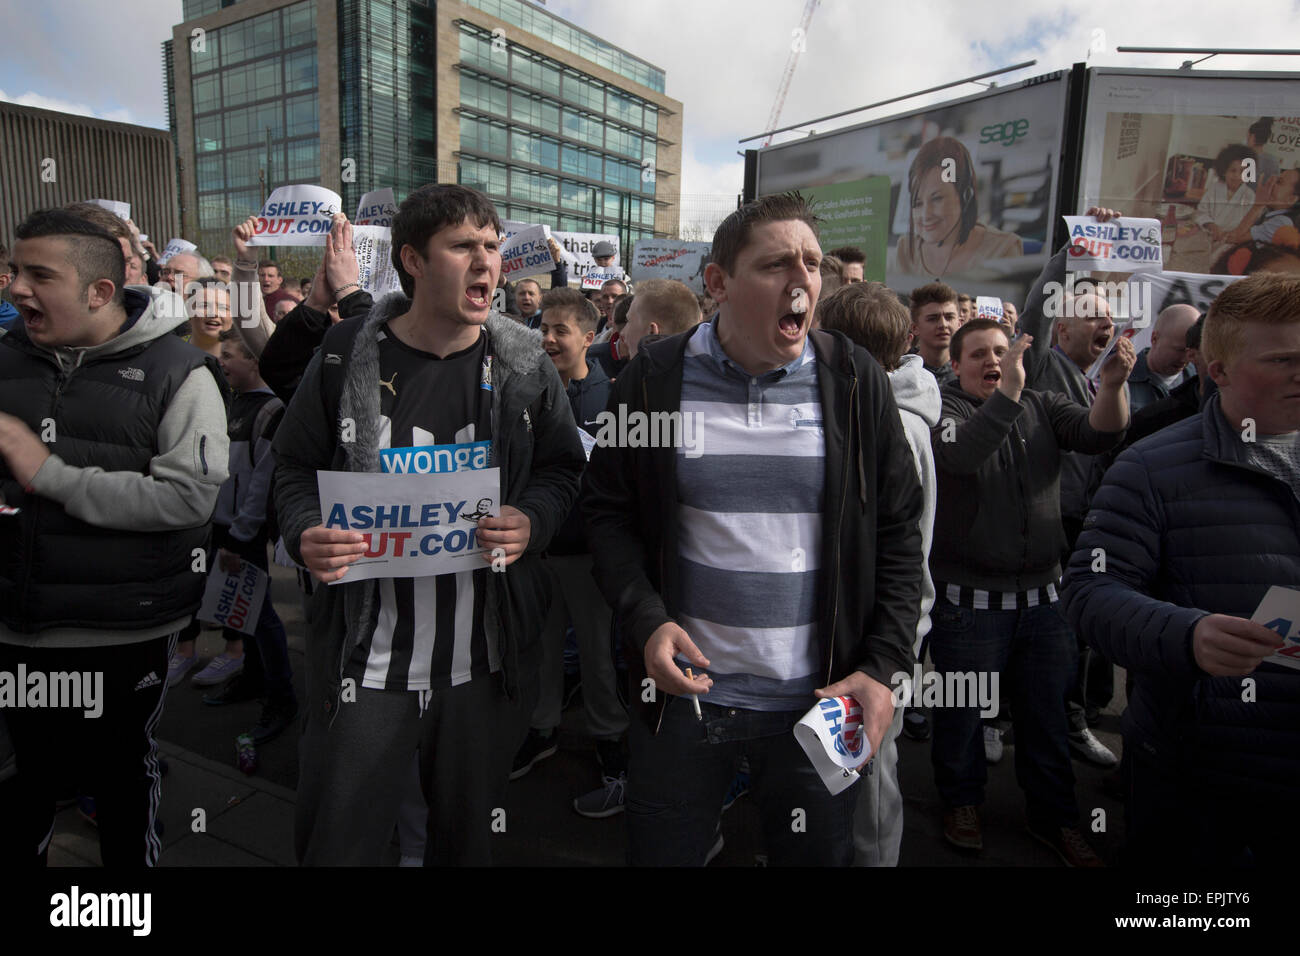 Protesters holding signs and chanting during a demonstration at the Gallowgate end of the stadium before Newcastle United host Tottenham Hotspurs in an English Premier League match at St. James' Park. The match was boycotted by a section of the home support critical of the role of owner Mike Ashley and sponsorship by a payday loan company. The match was won by Spurs by 3-1, watched by 47,427, the lowest league gate of the season at the stadium. Stock Photo